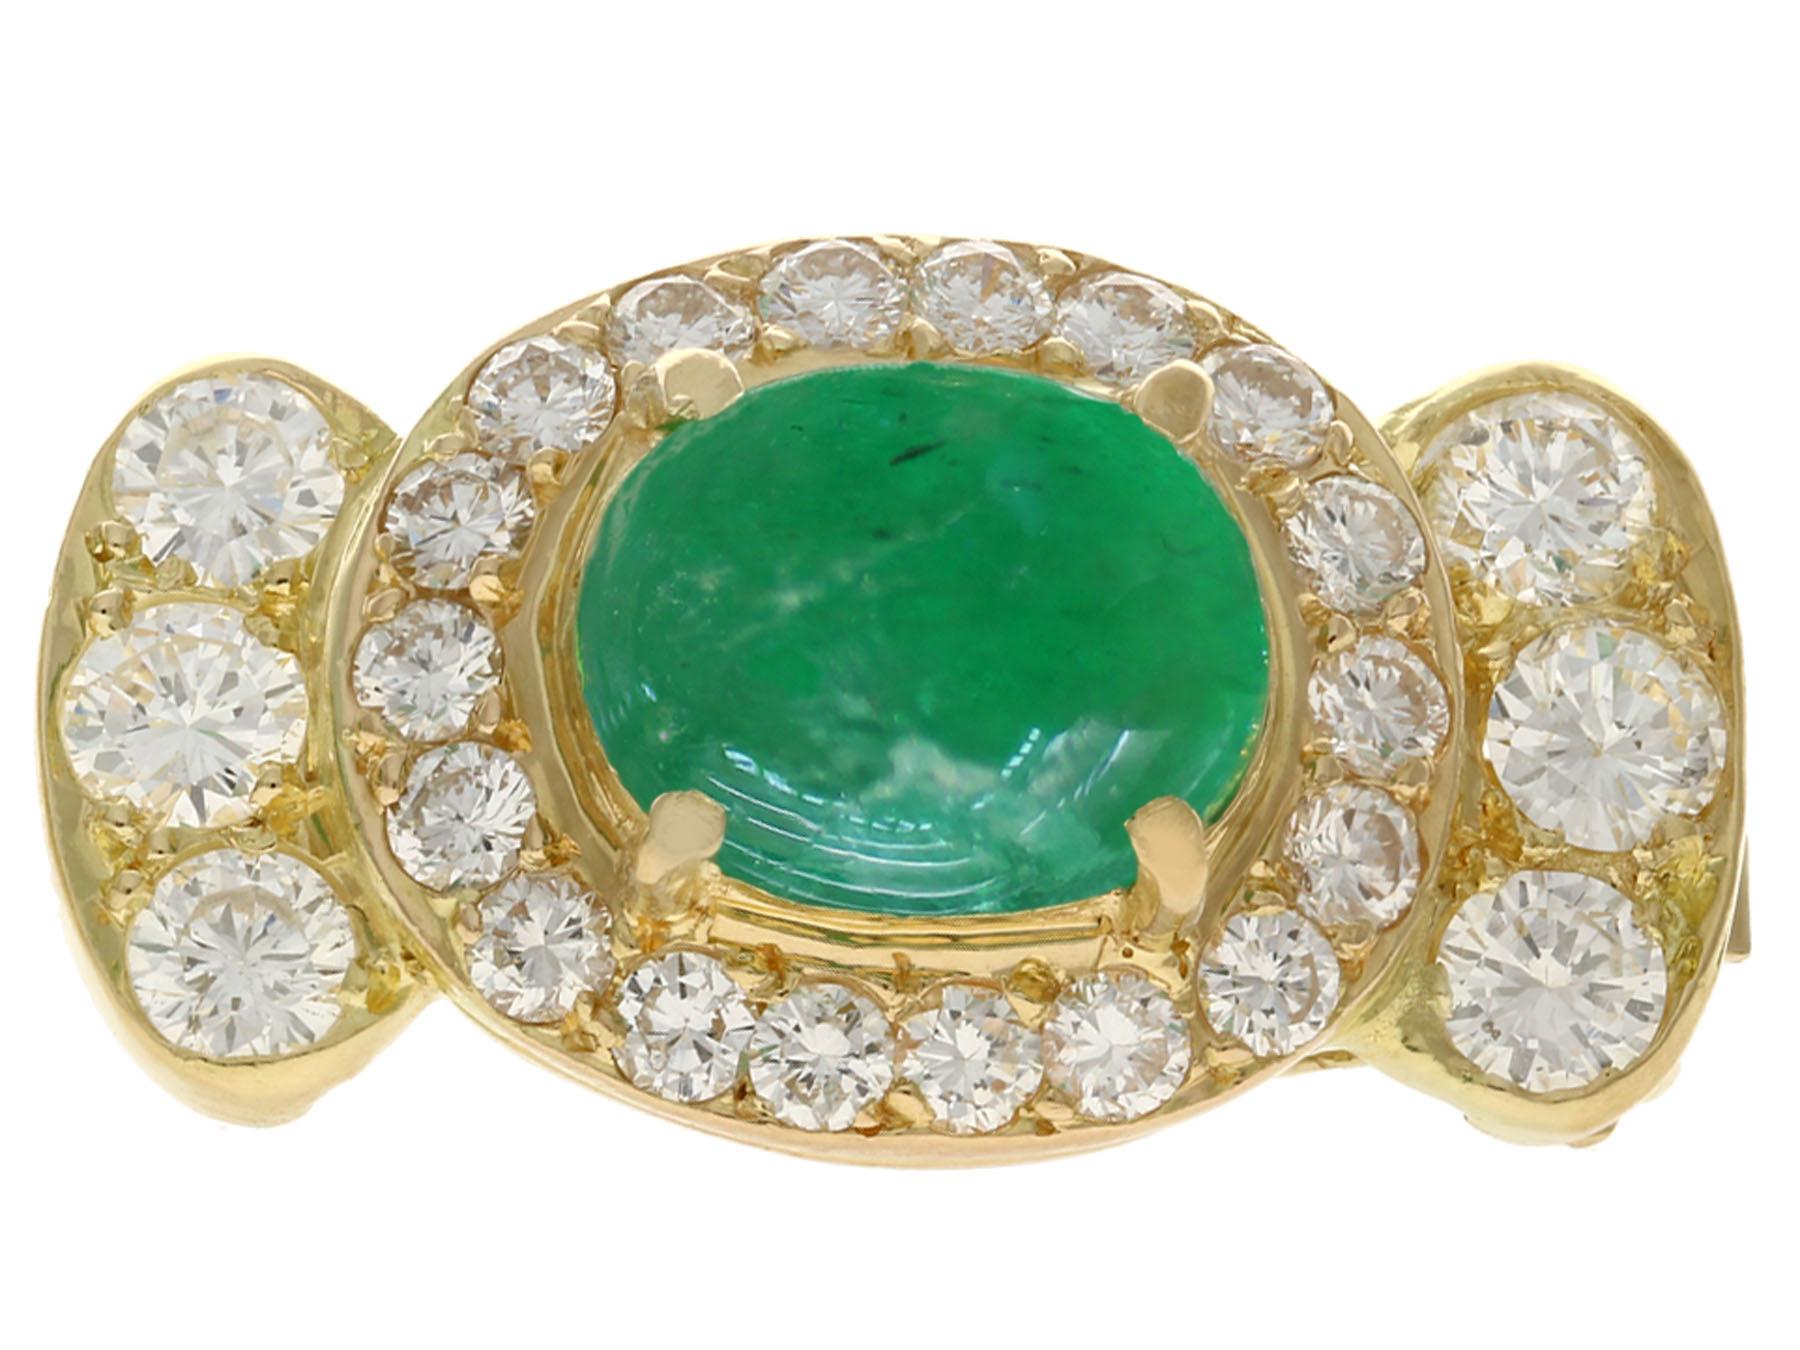 An impressive pair of vintage 5.86 carat emerald and 4.32 carat diamond, 18 karat yellow gold earrings; part of our diverse antique jewelry and estate jewelry collections.

These fine and impressive vintage earrings have been crafted in 18k yellow